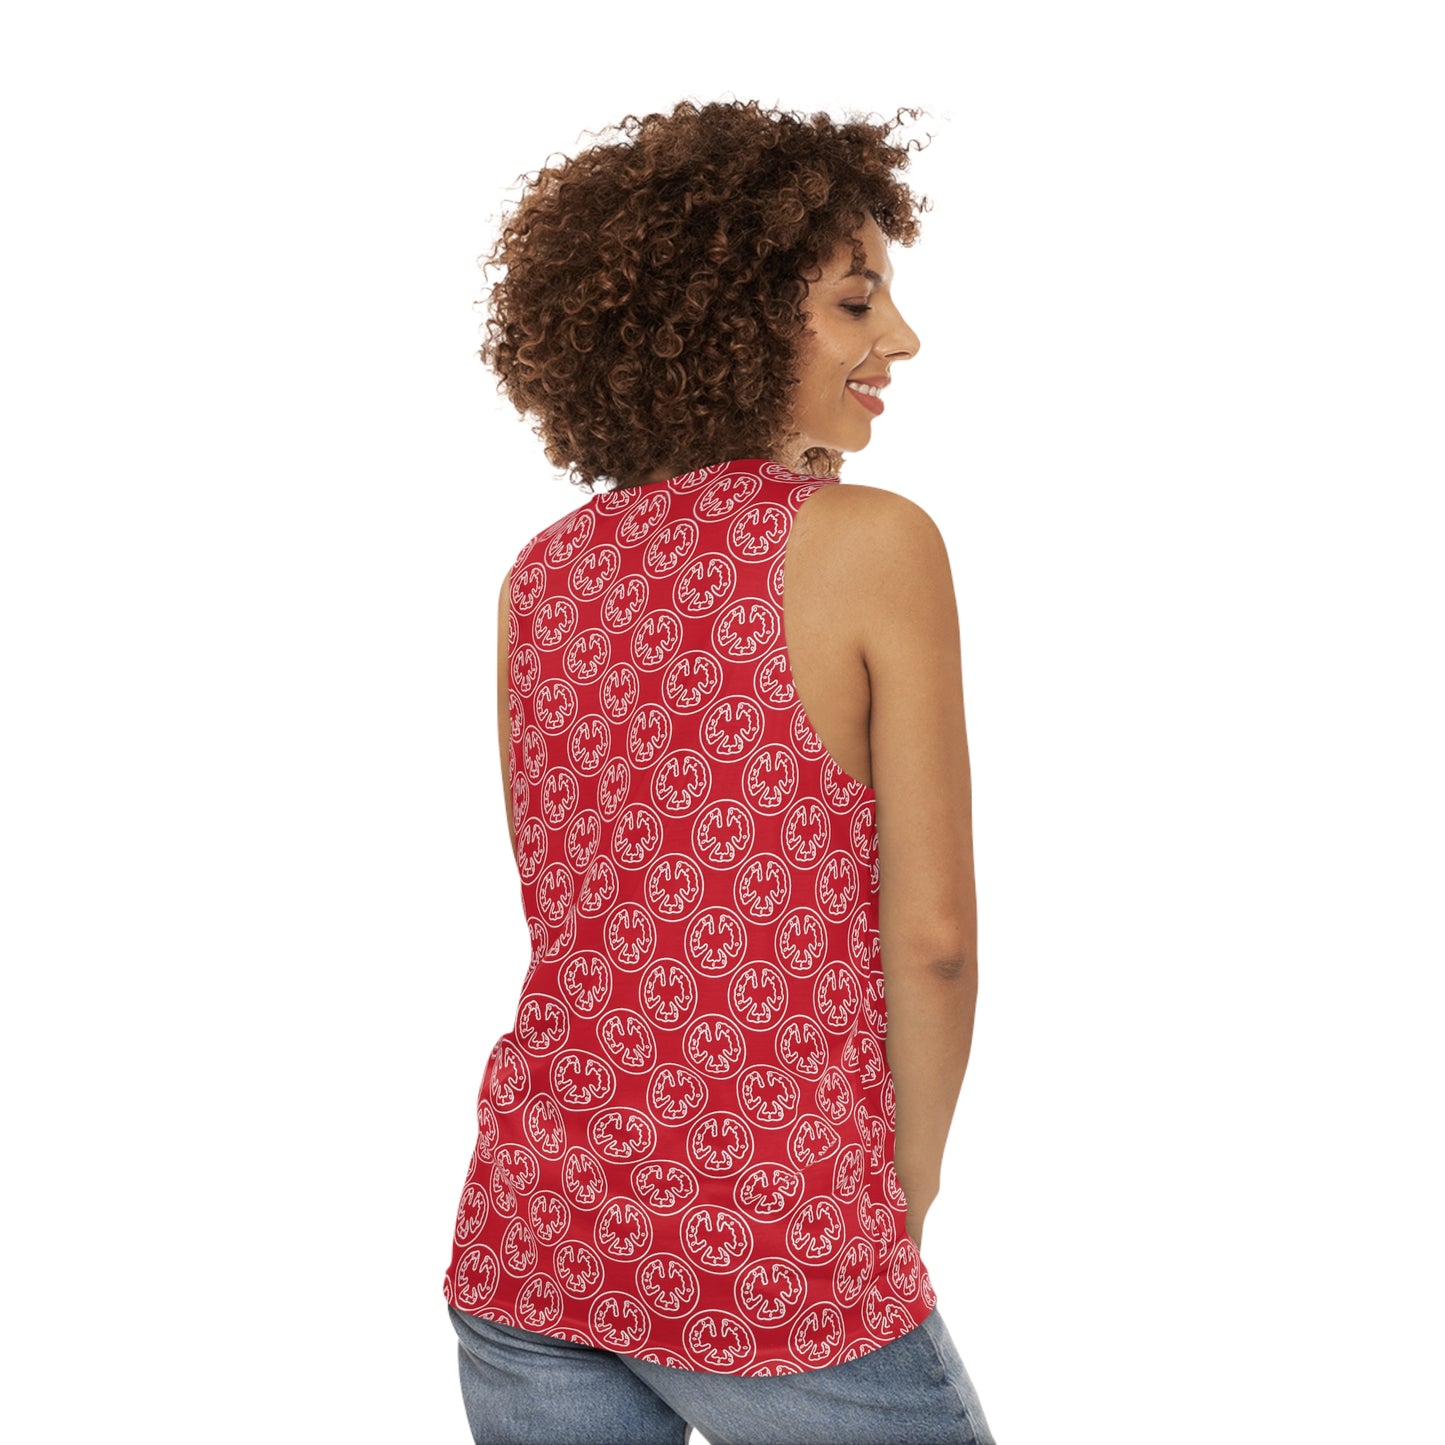 Tomato Tank Top - Red